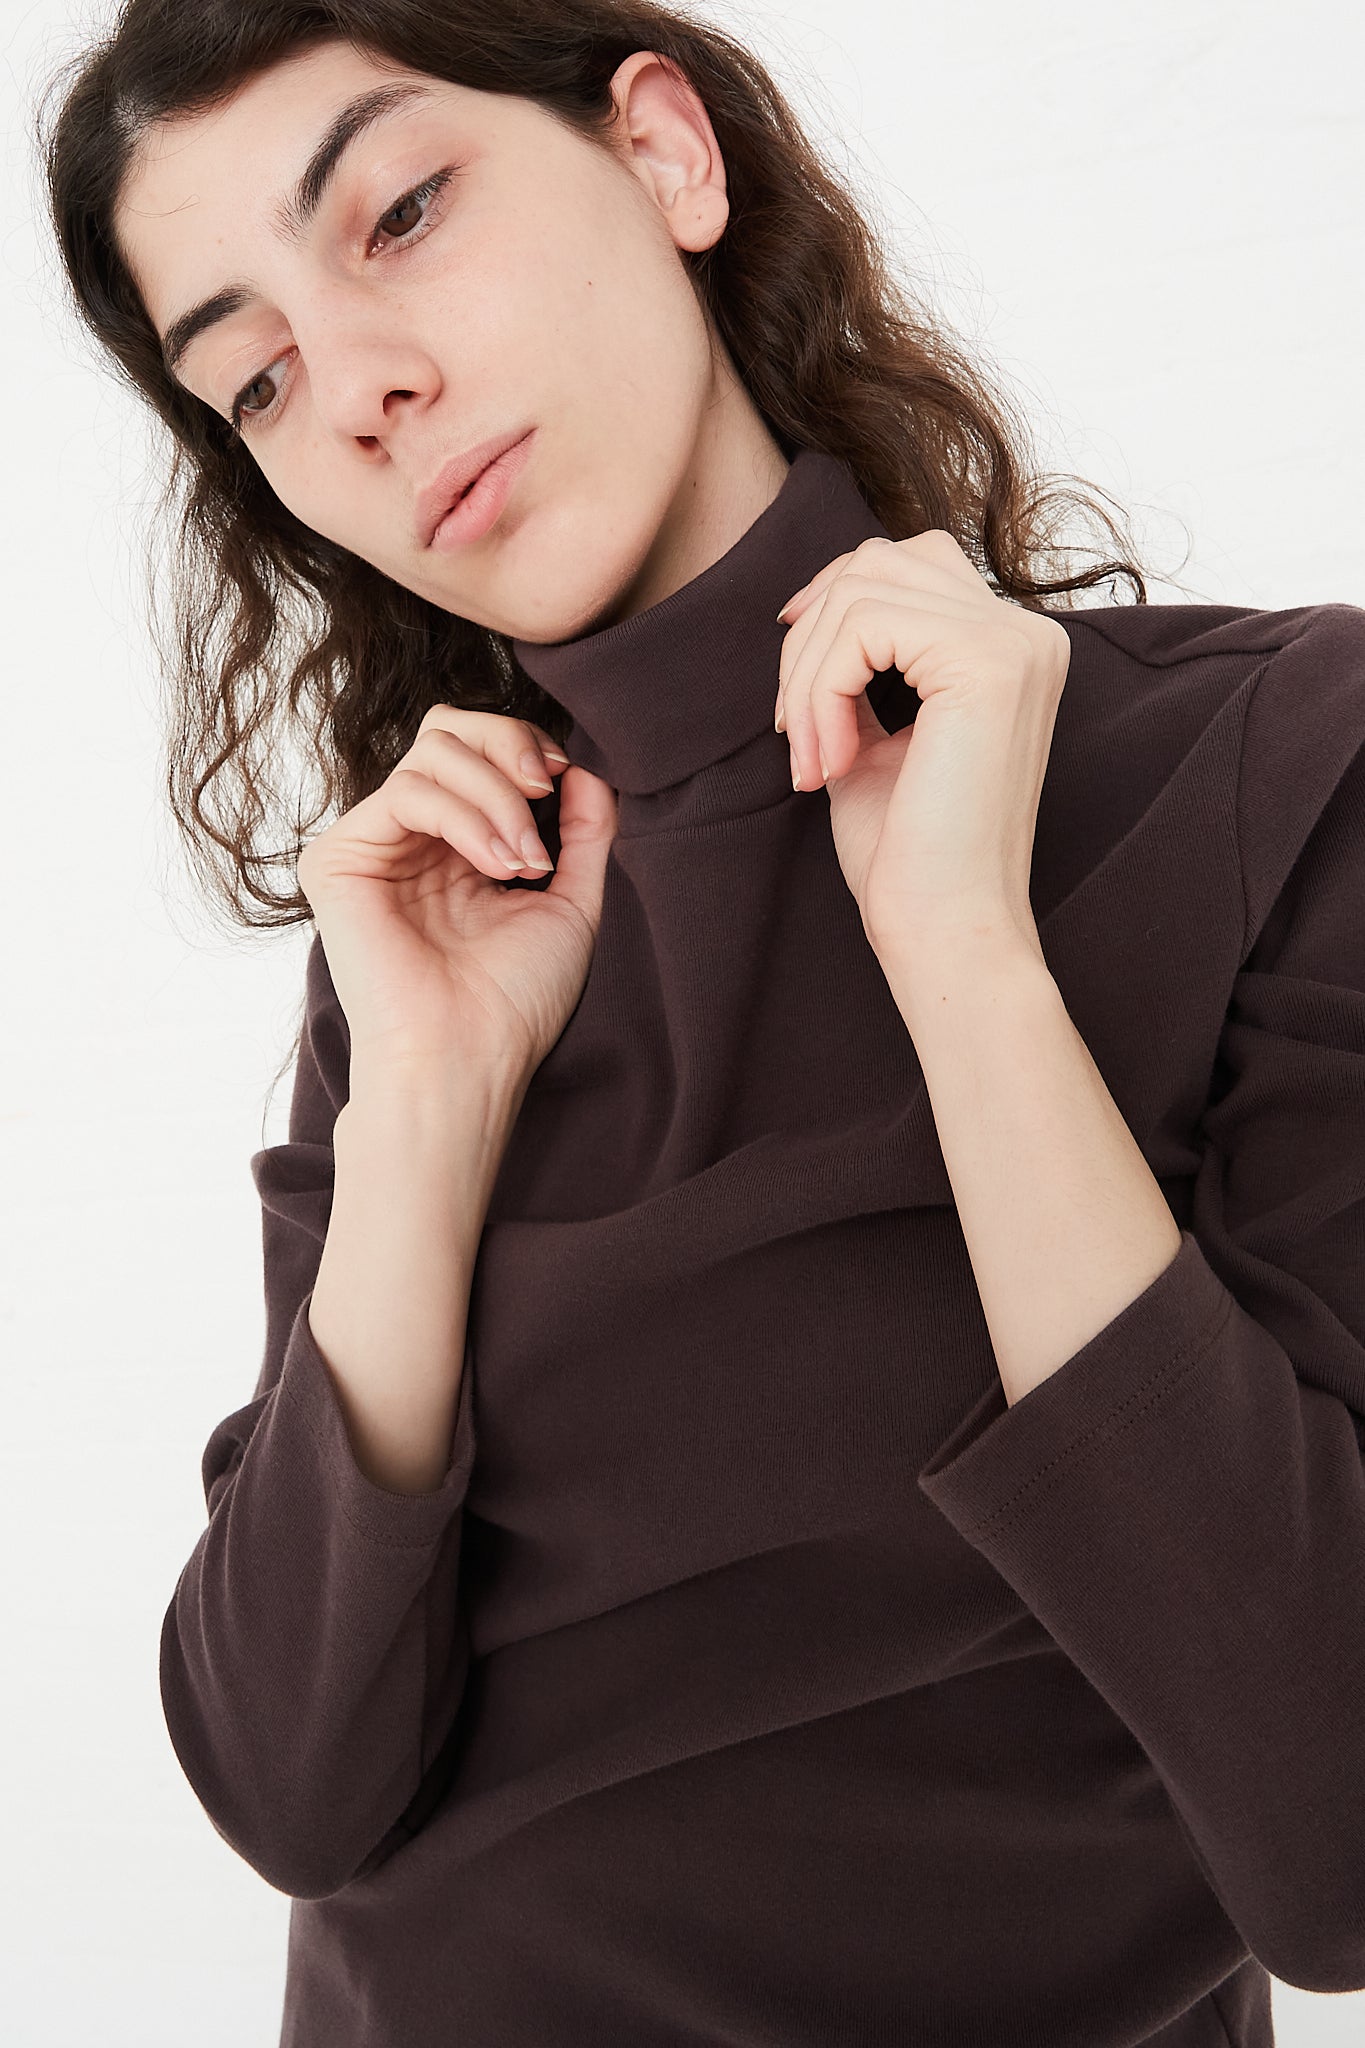 Organic Cotton Rib Knit Turtleneck Top in Plum by Black Crane for Oroboro Front